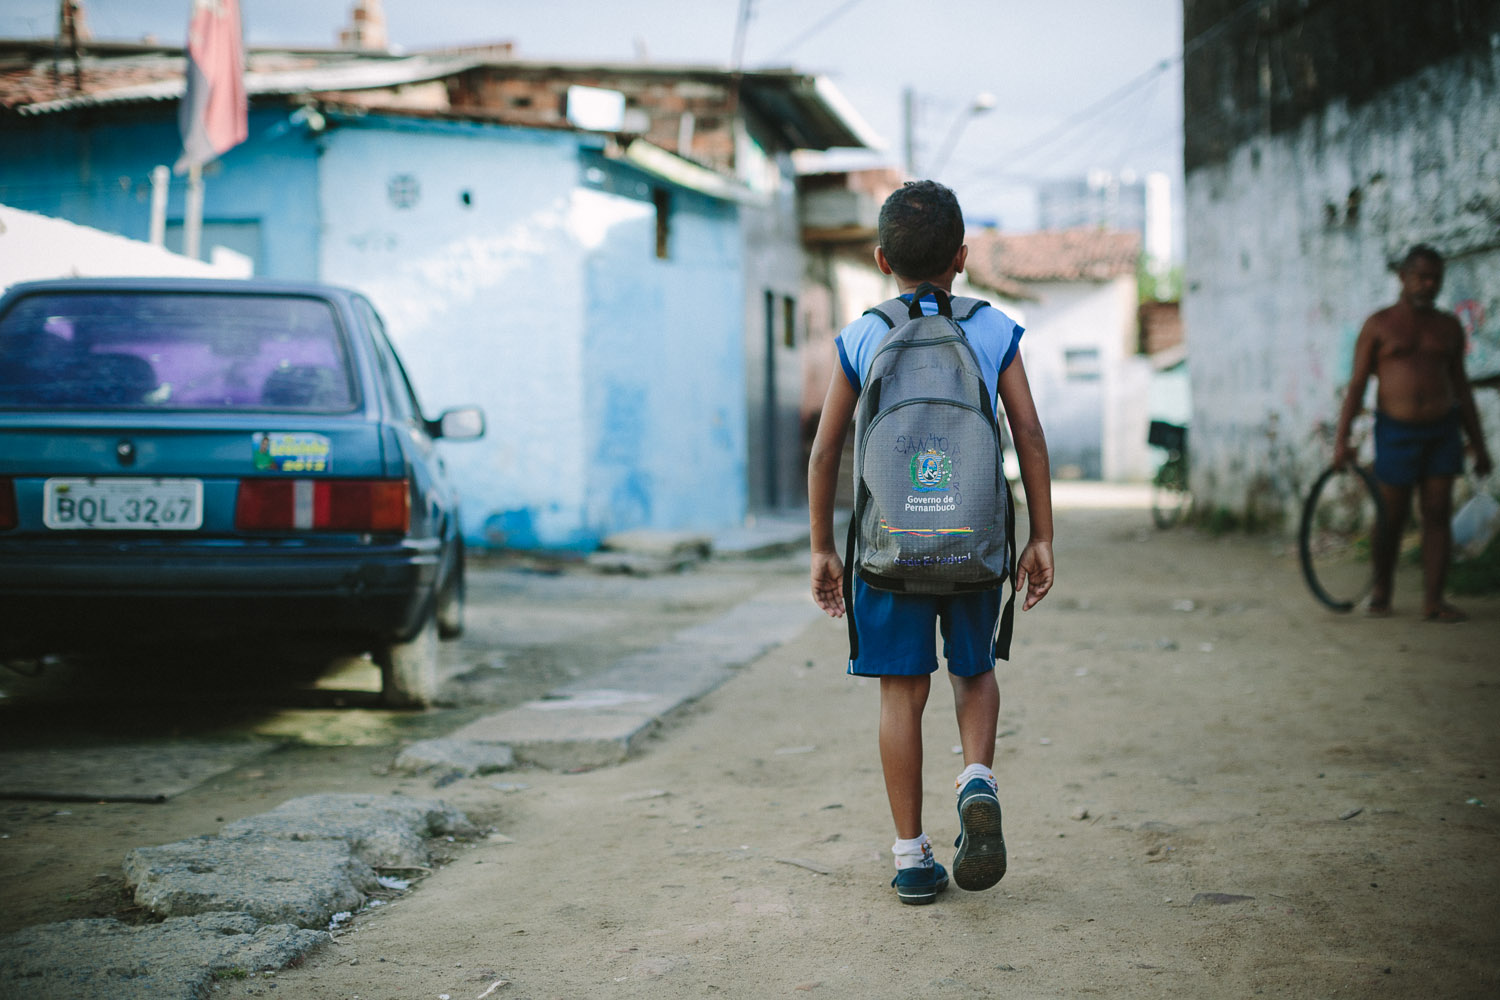   Emidio walking to his classes at the Compassion Center.  